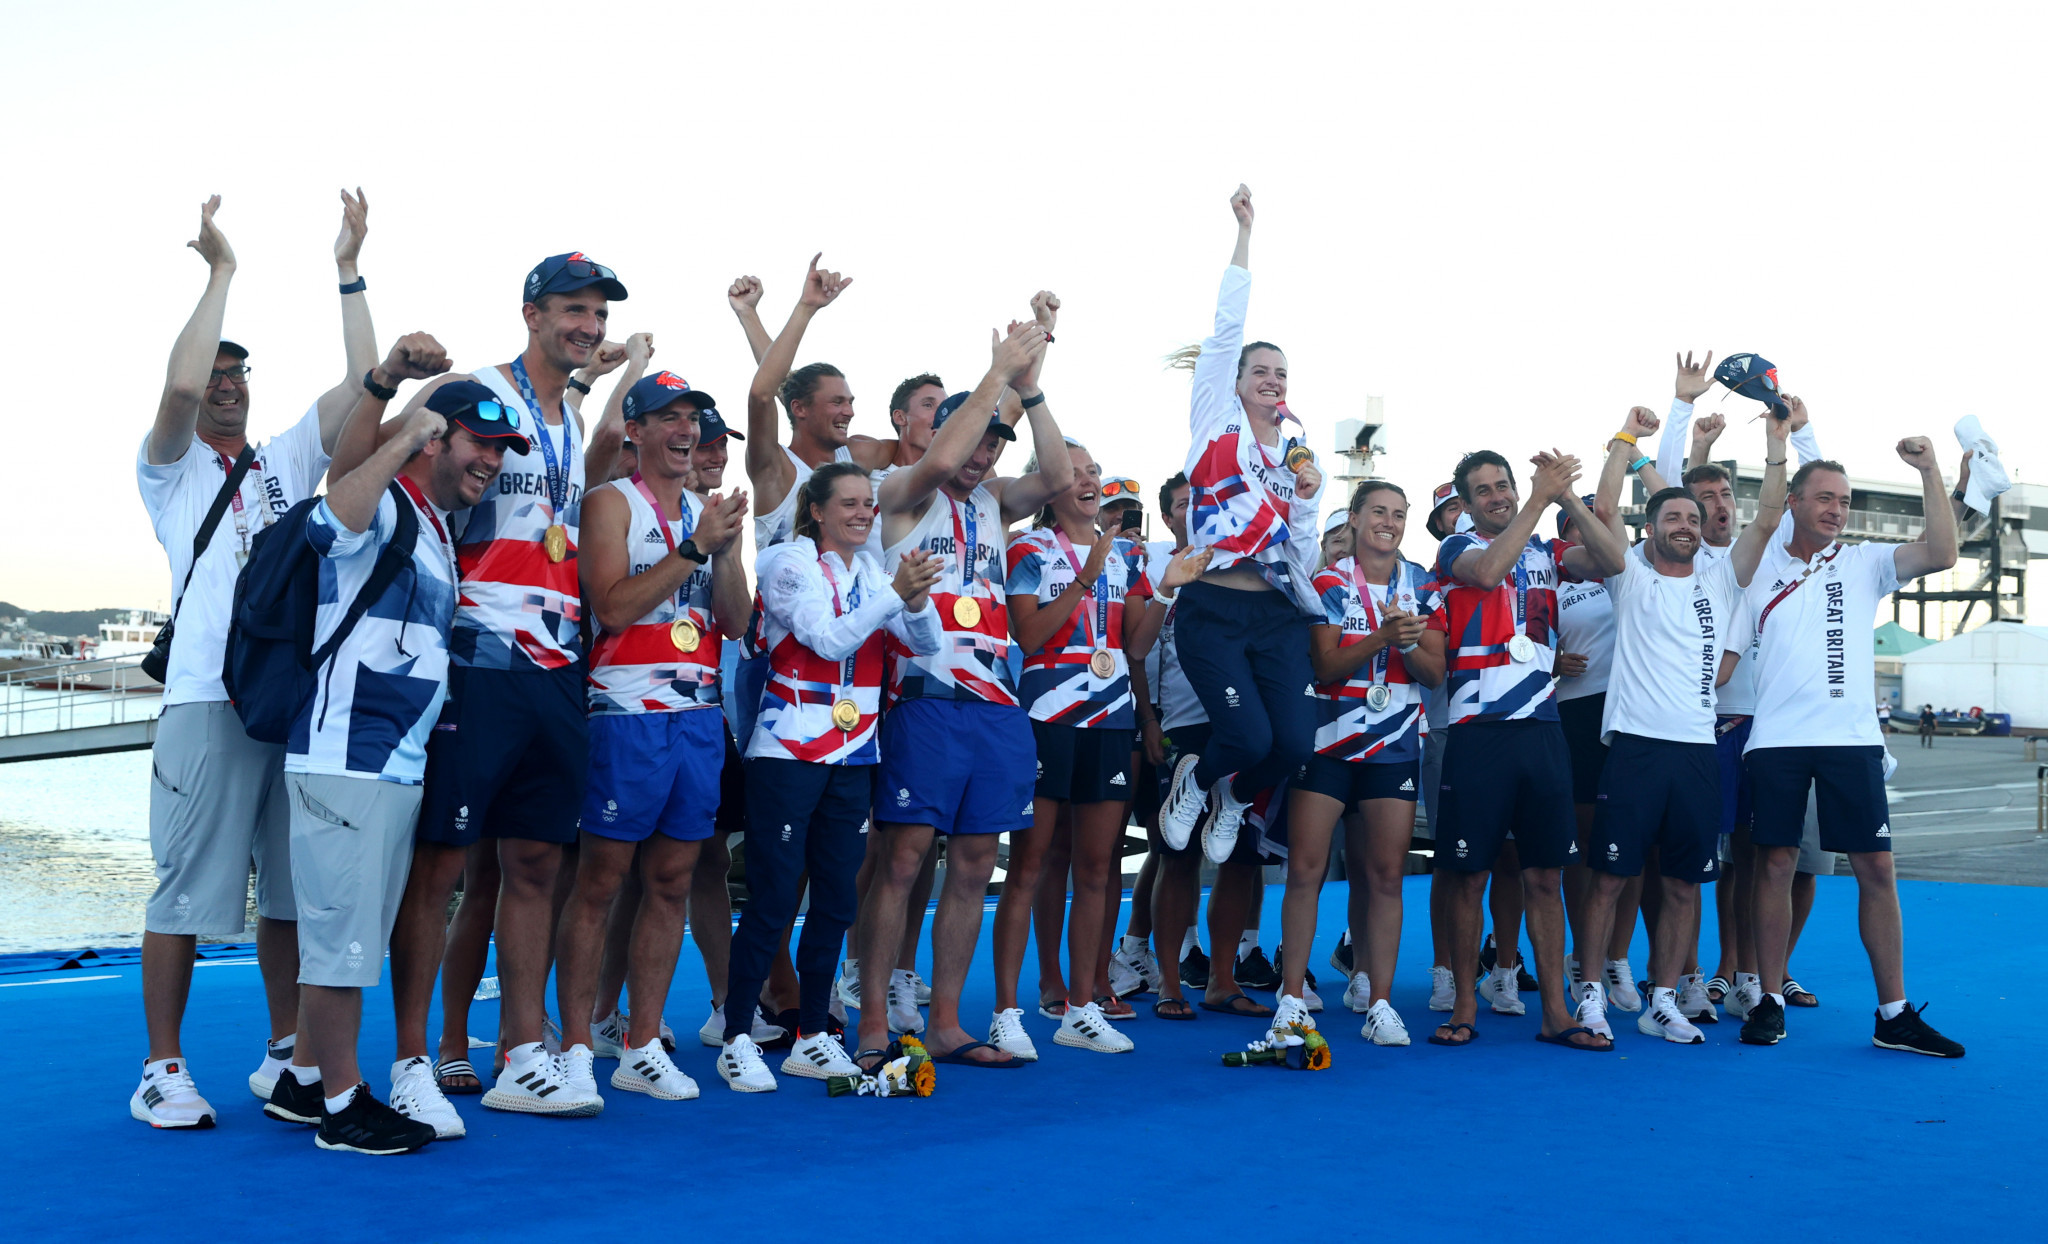 Britain celebrated five medals in Tokyo at their most successful Olympic regatta since 2008 ©Getty Images